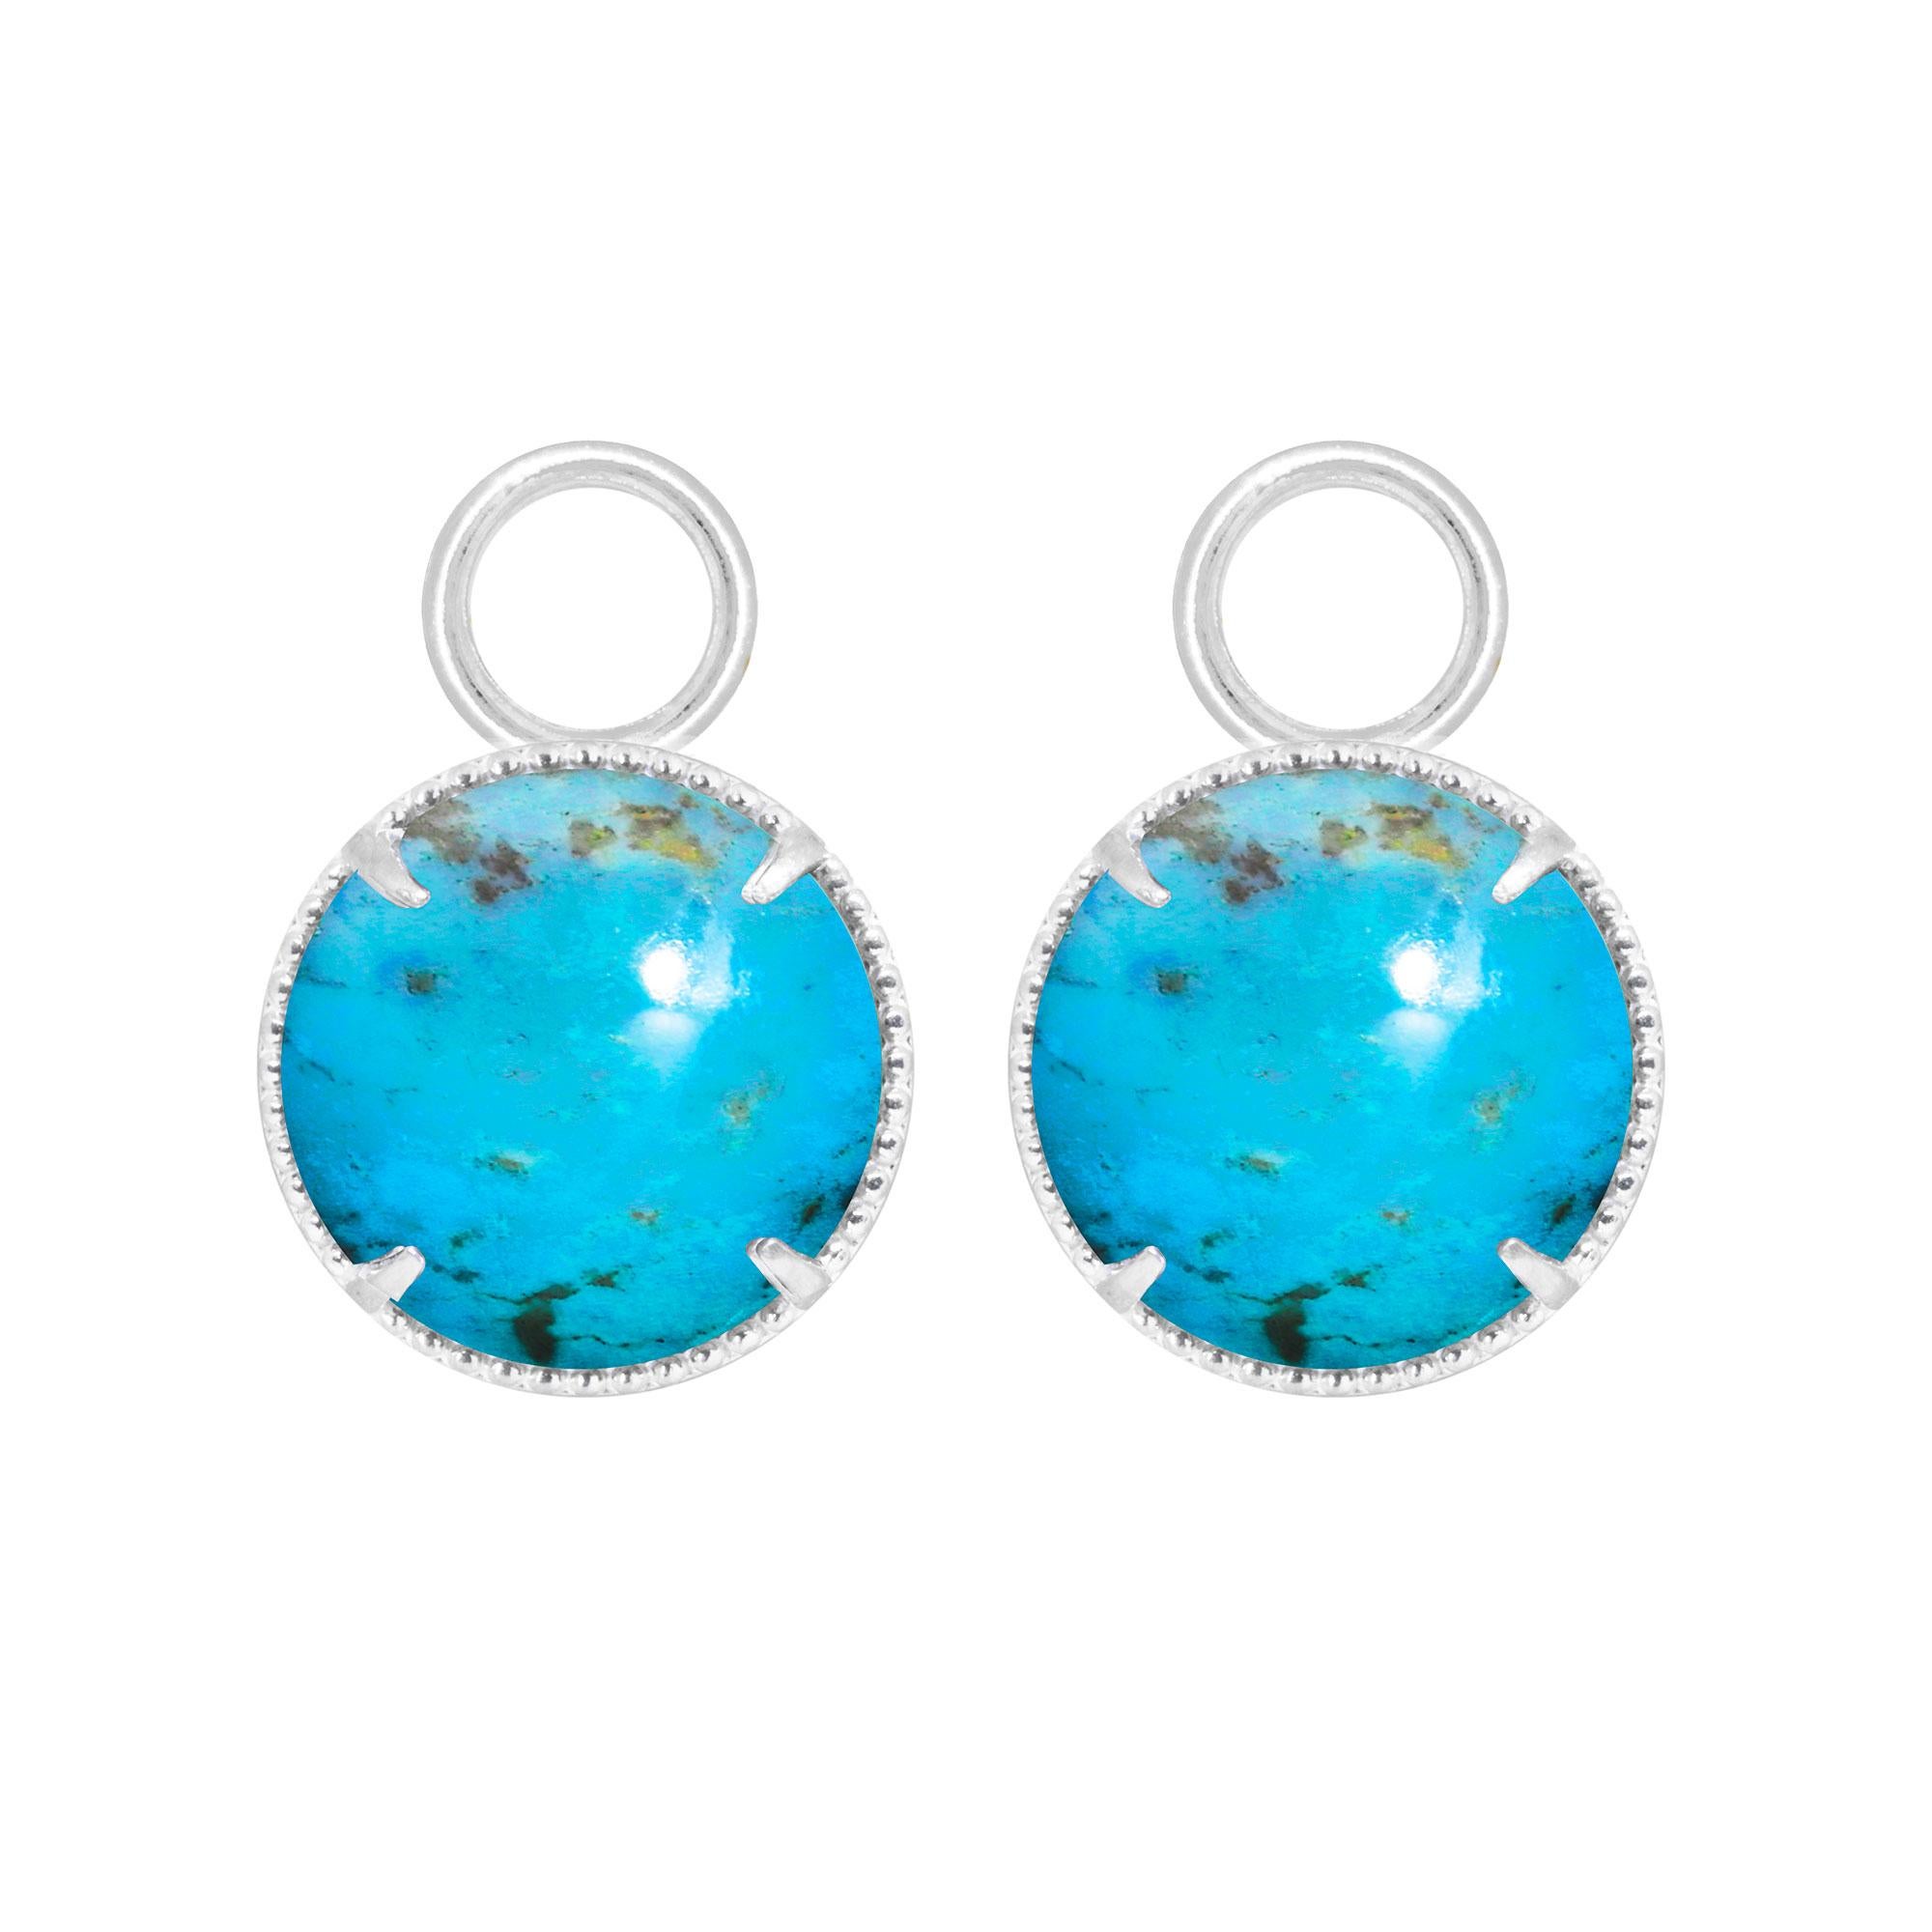 Contemporary Vintage Lace Round Kingman Turquoise Silver Earring Charms For Sale